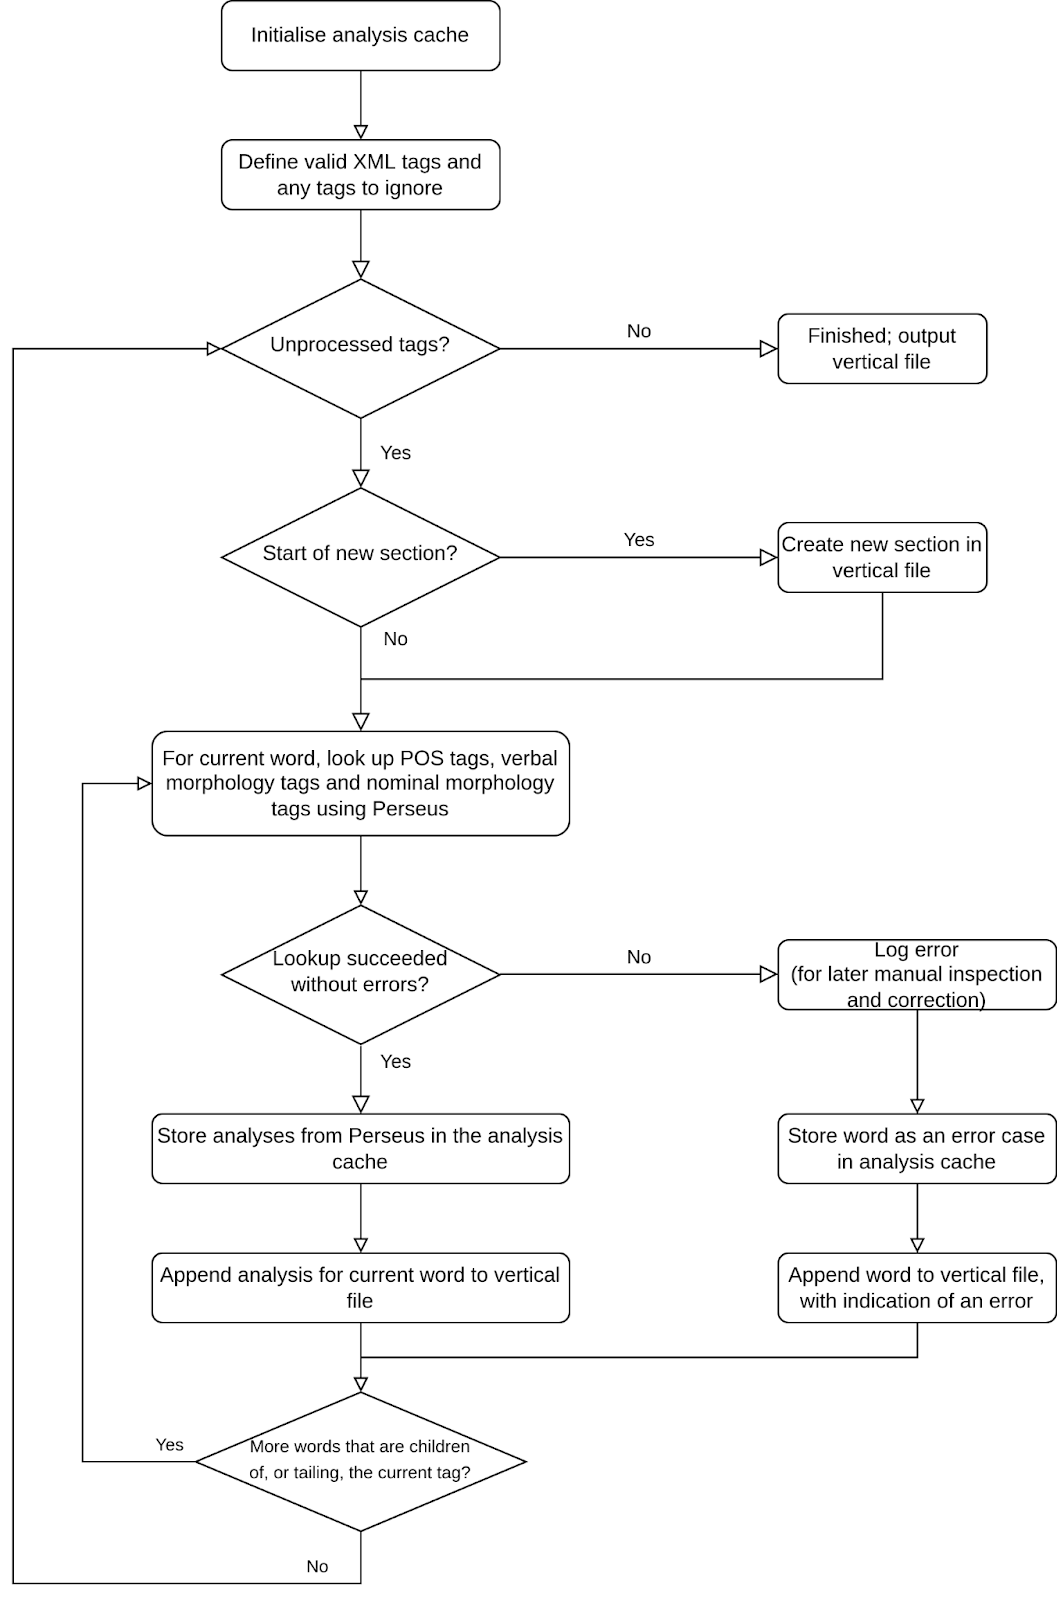 Screenshot of a flowchart for the conversion process. The process outlines the 
                workflow for processing XML tags, analyzing tags that exist, logging errors, and storing analysis from Perseus
             